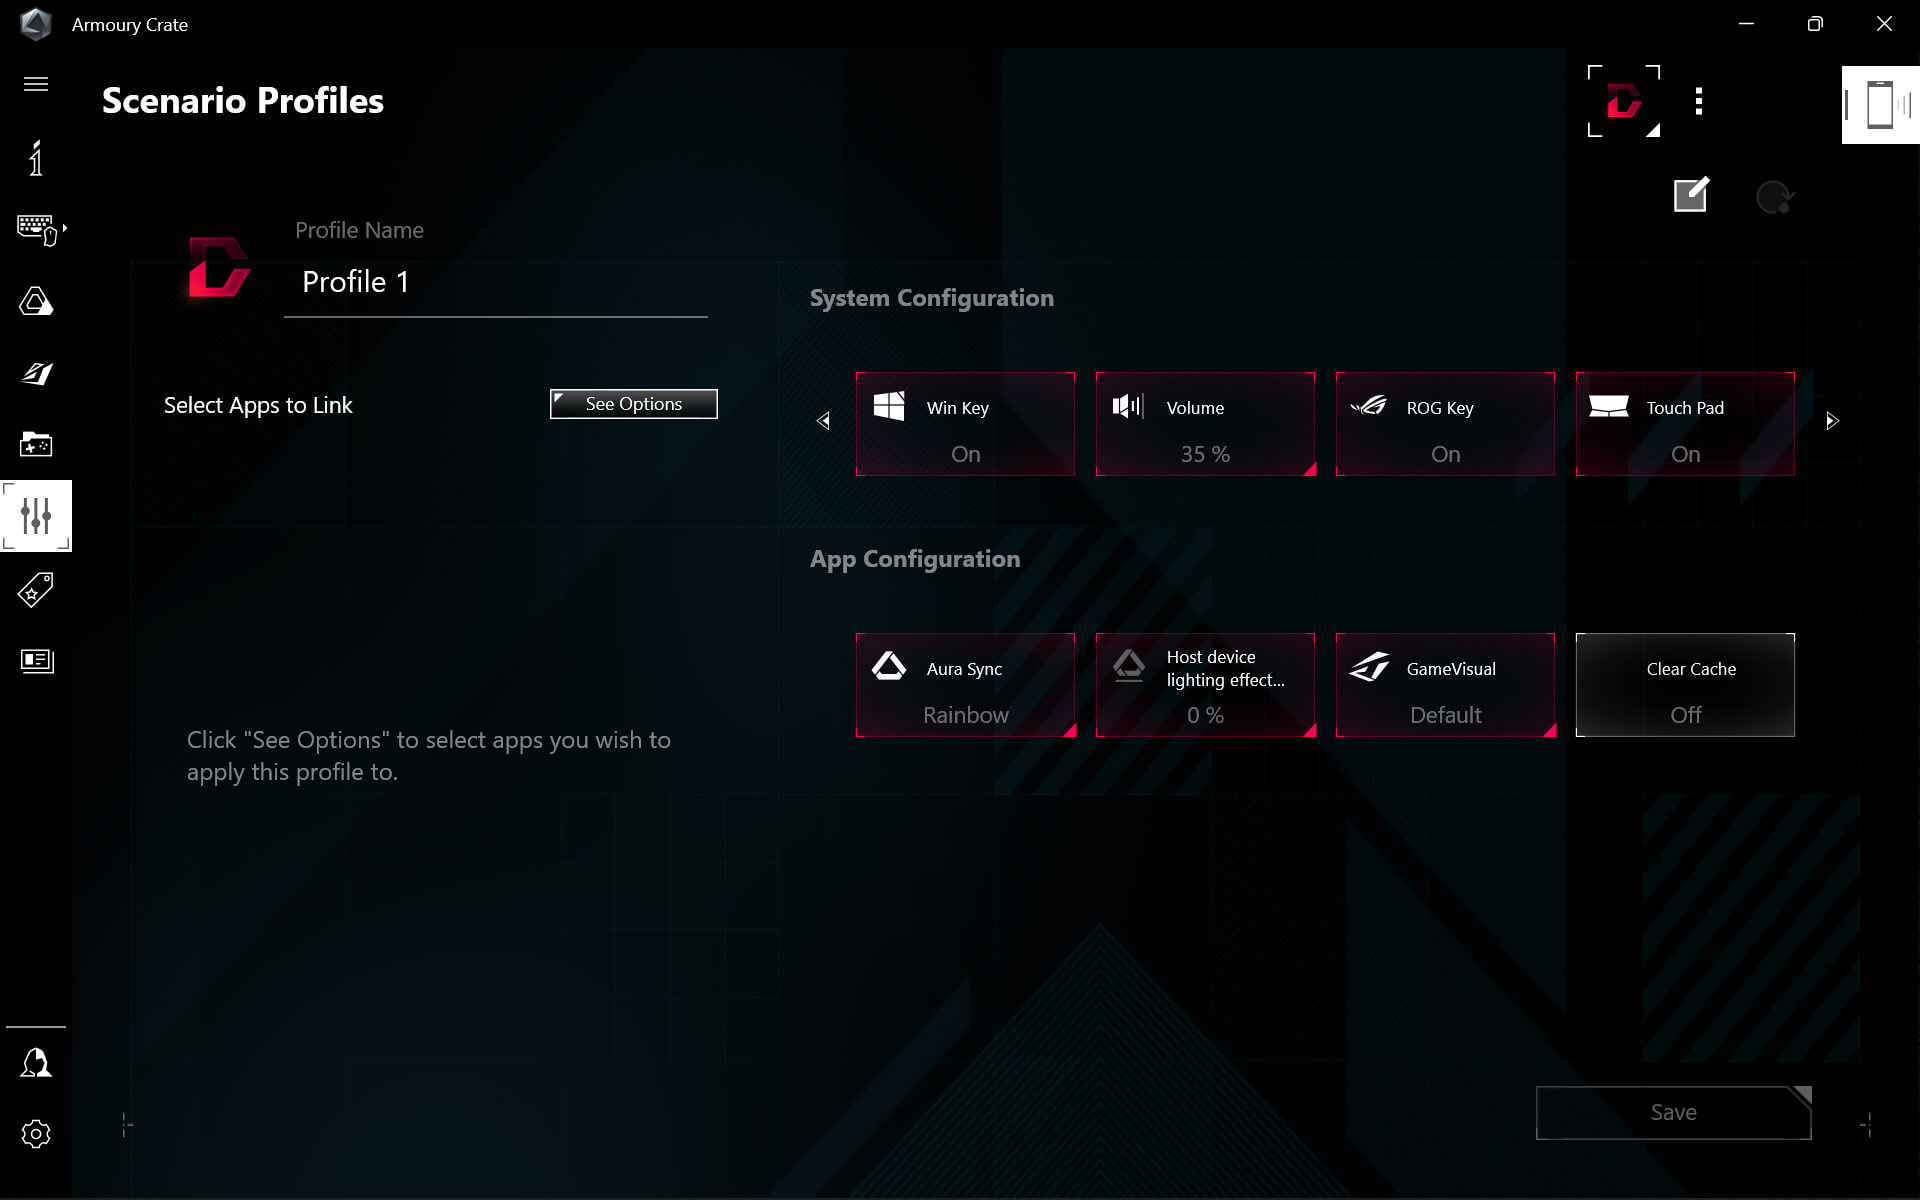 Screenshot of the Scenario profile section of Armoury Crate.